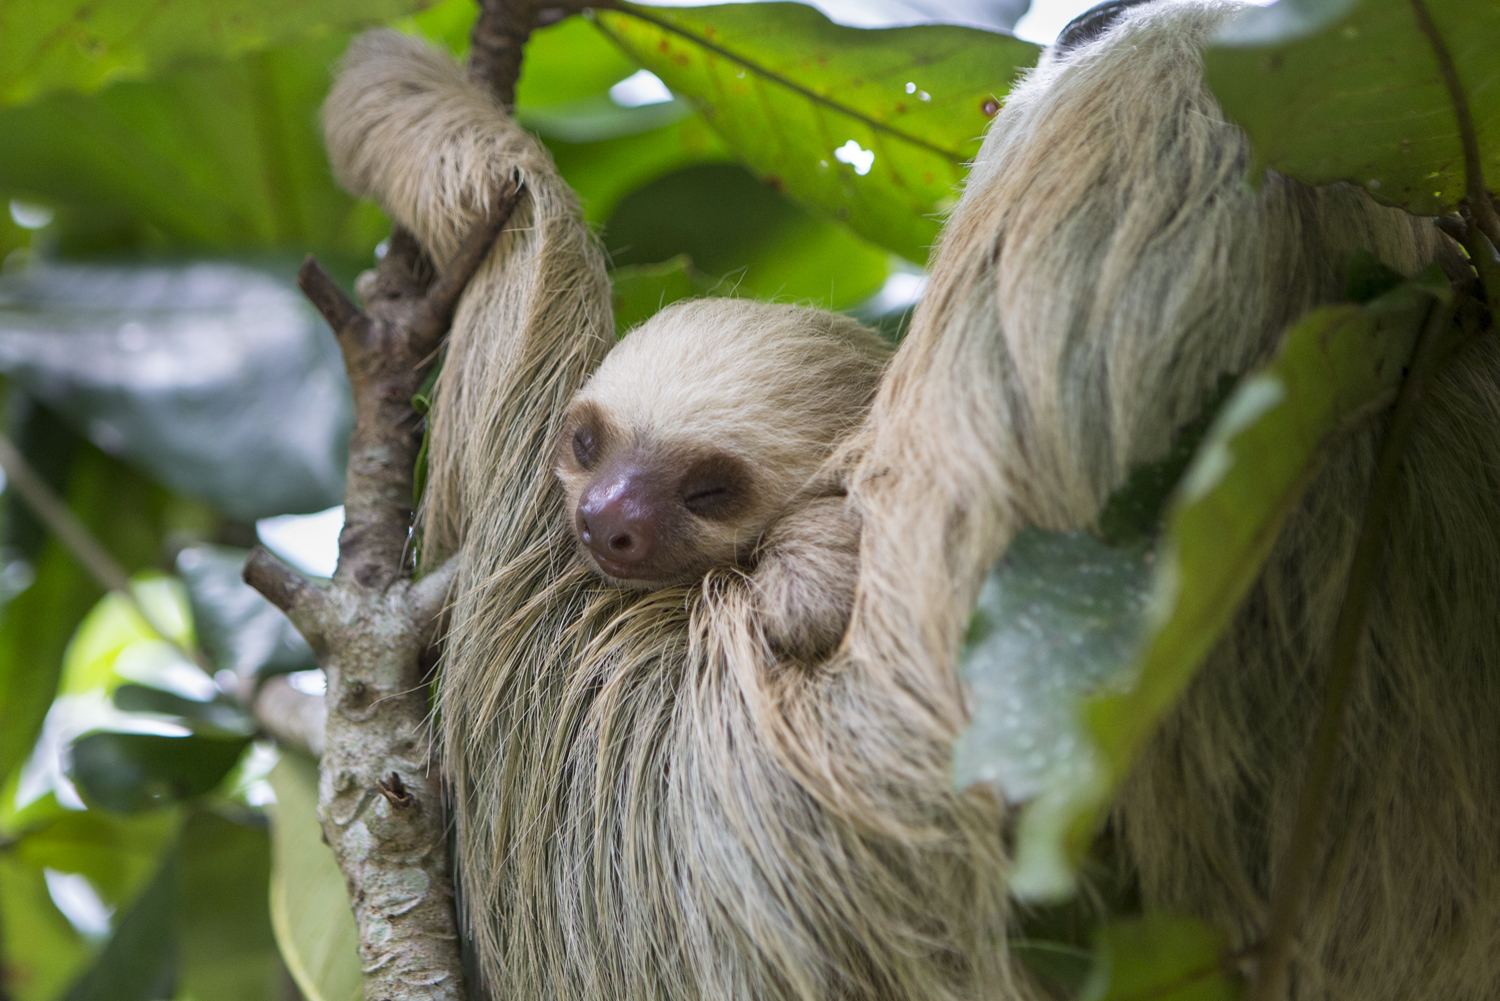 How much do sloths sleep? - The Sloth Conservation Foundation